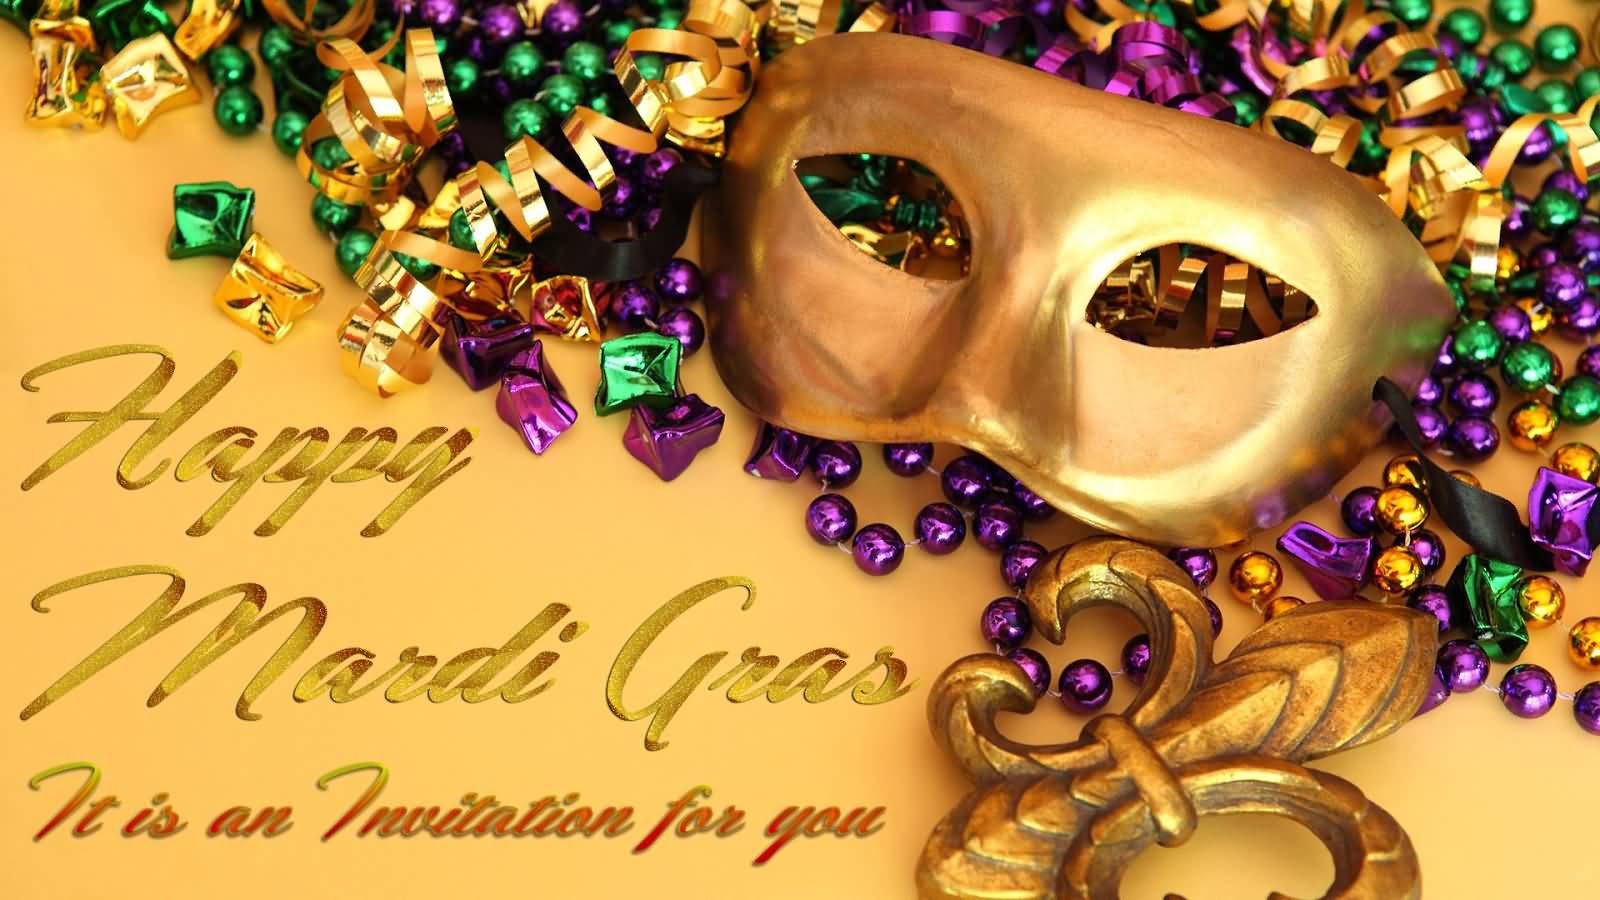 Happy Mardi Gras It Is An Invitation For You Mask Picture